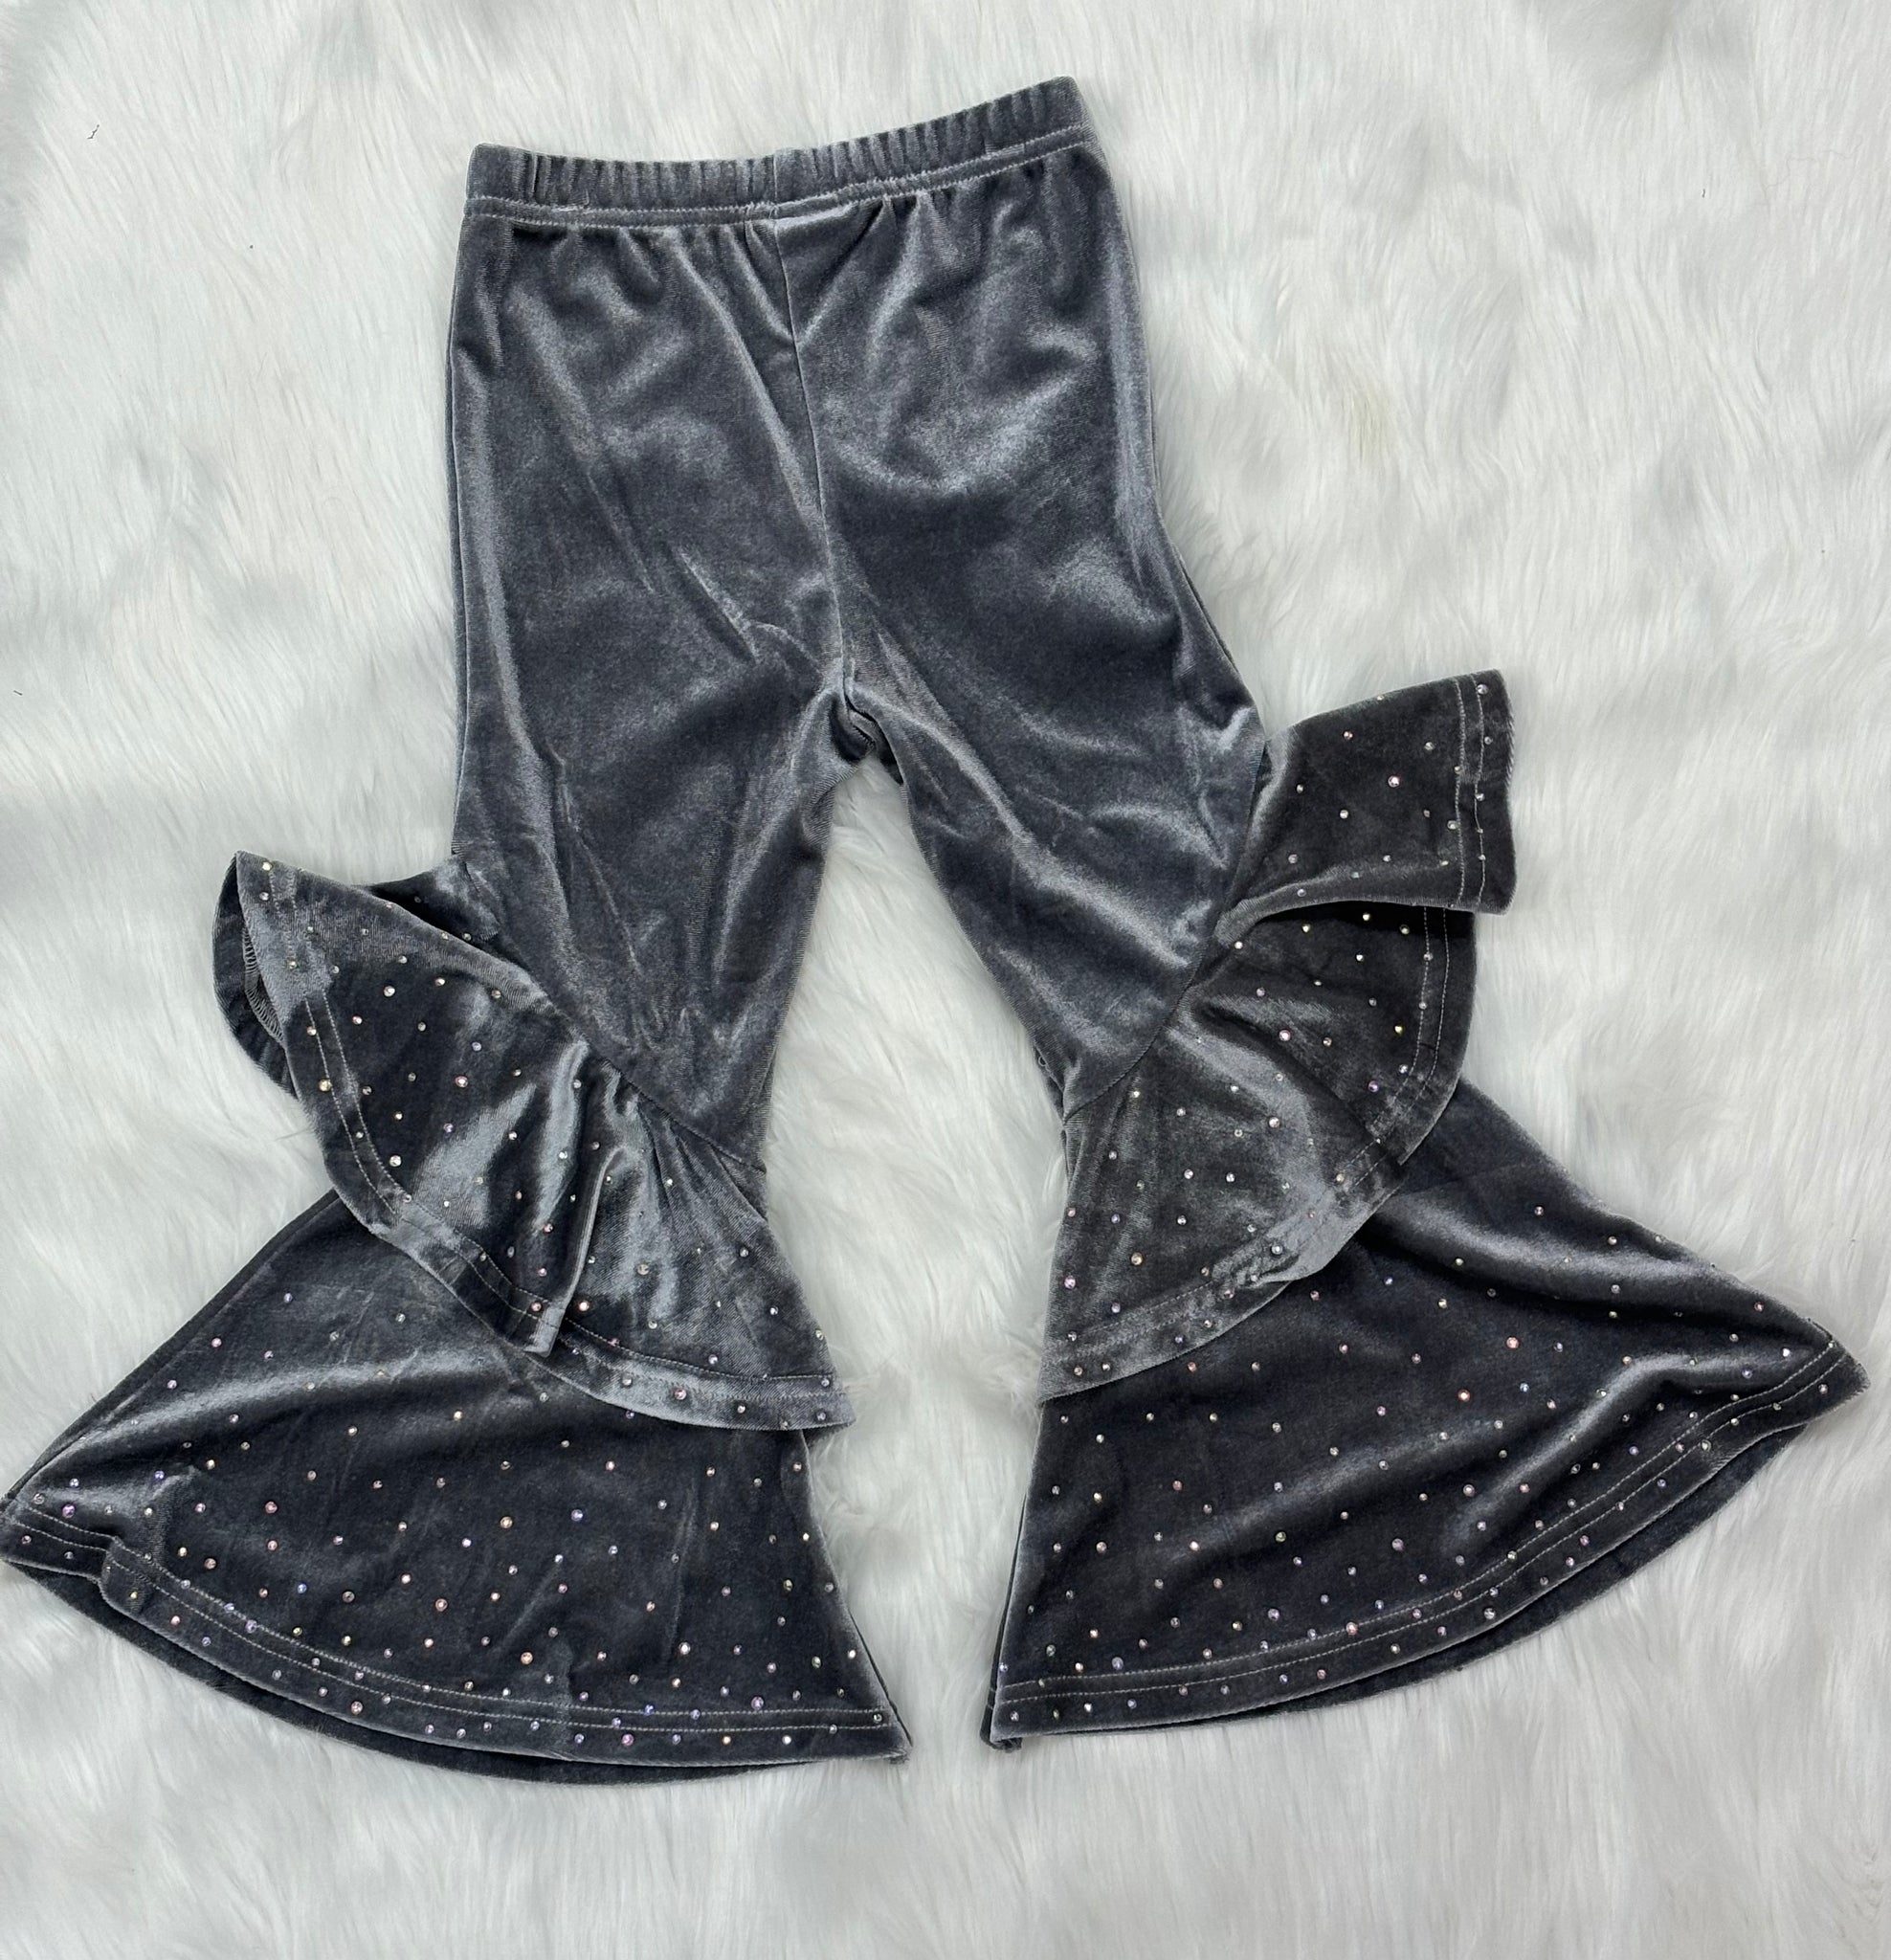 ML Kids Velour Bell Bottoms with Crystal Accents LG0039